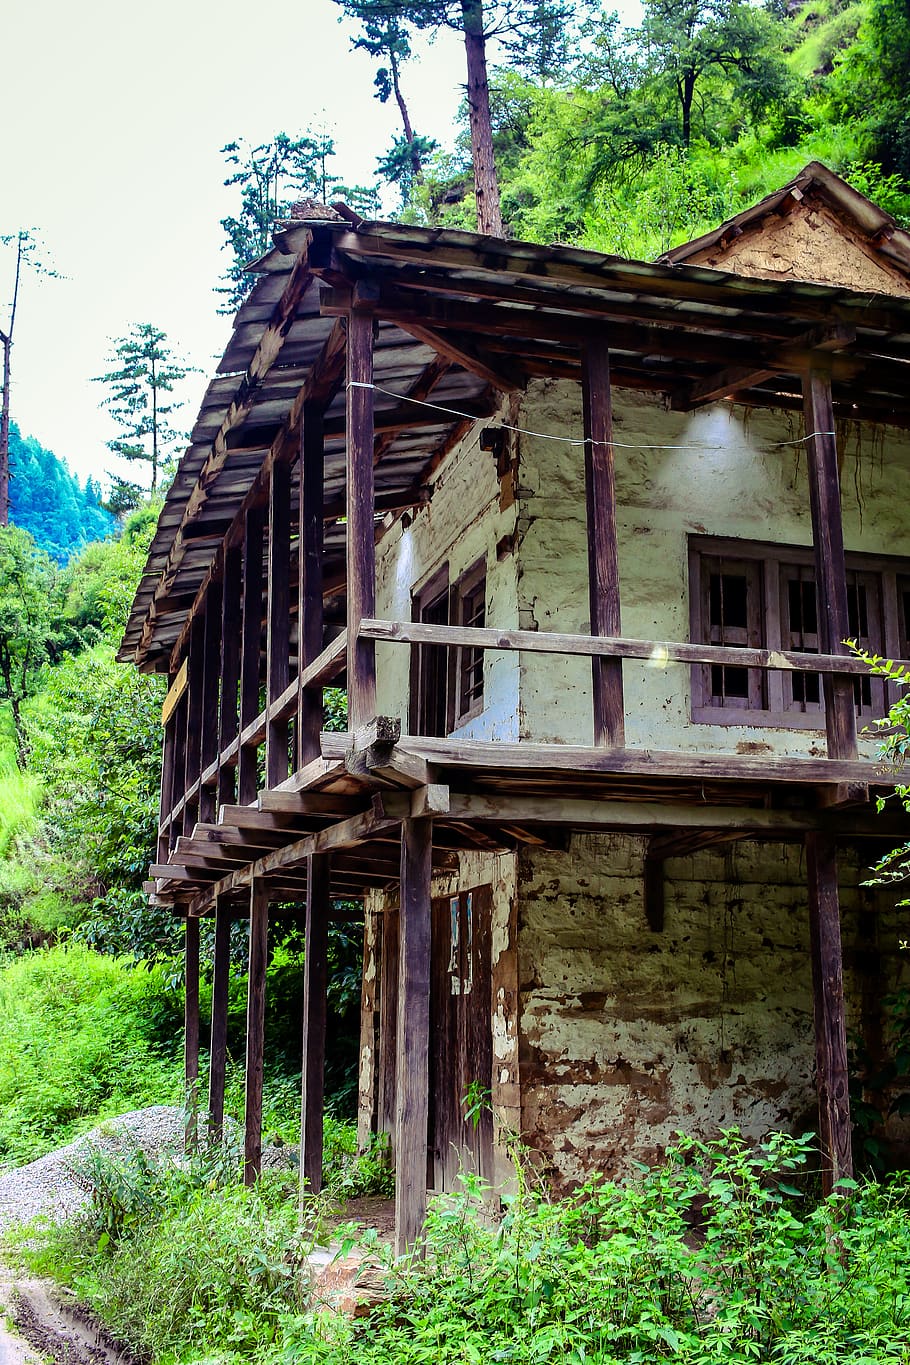 india, himachal pradesh, house, abandoned, old, trees, hills